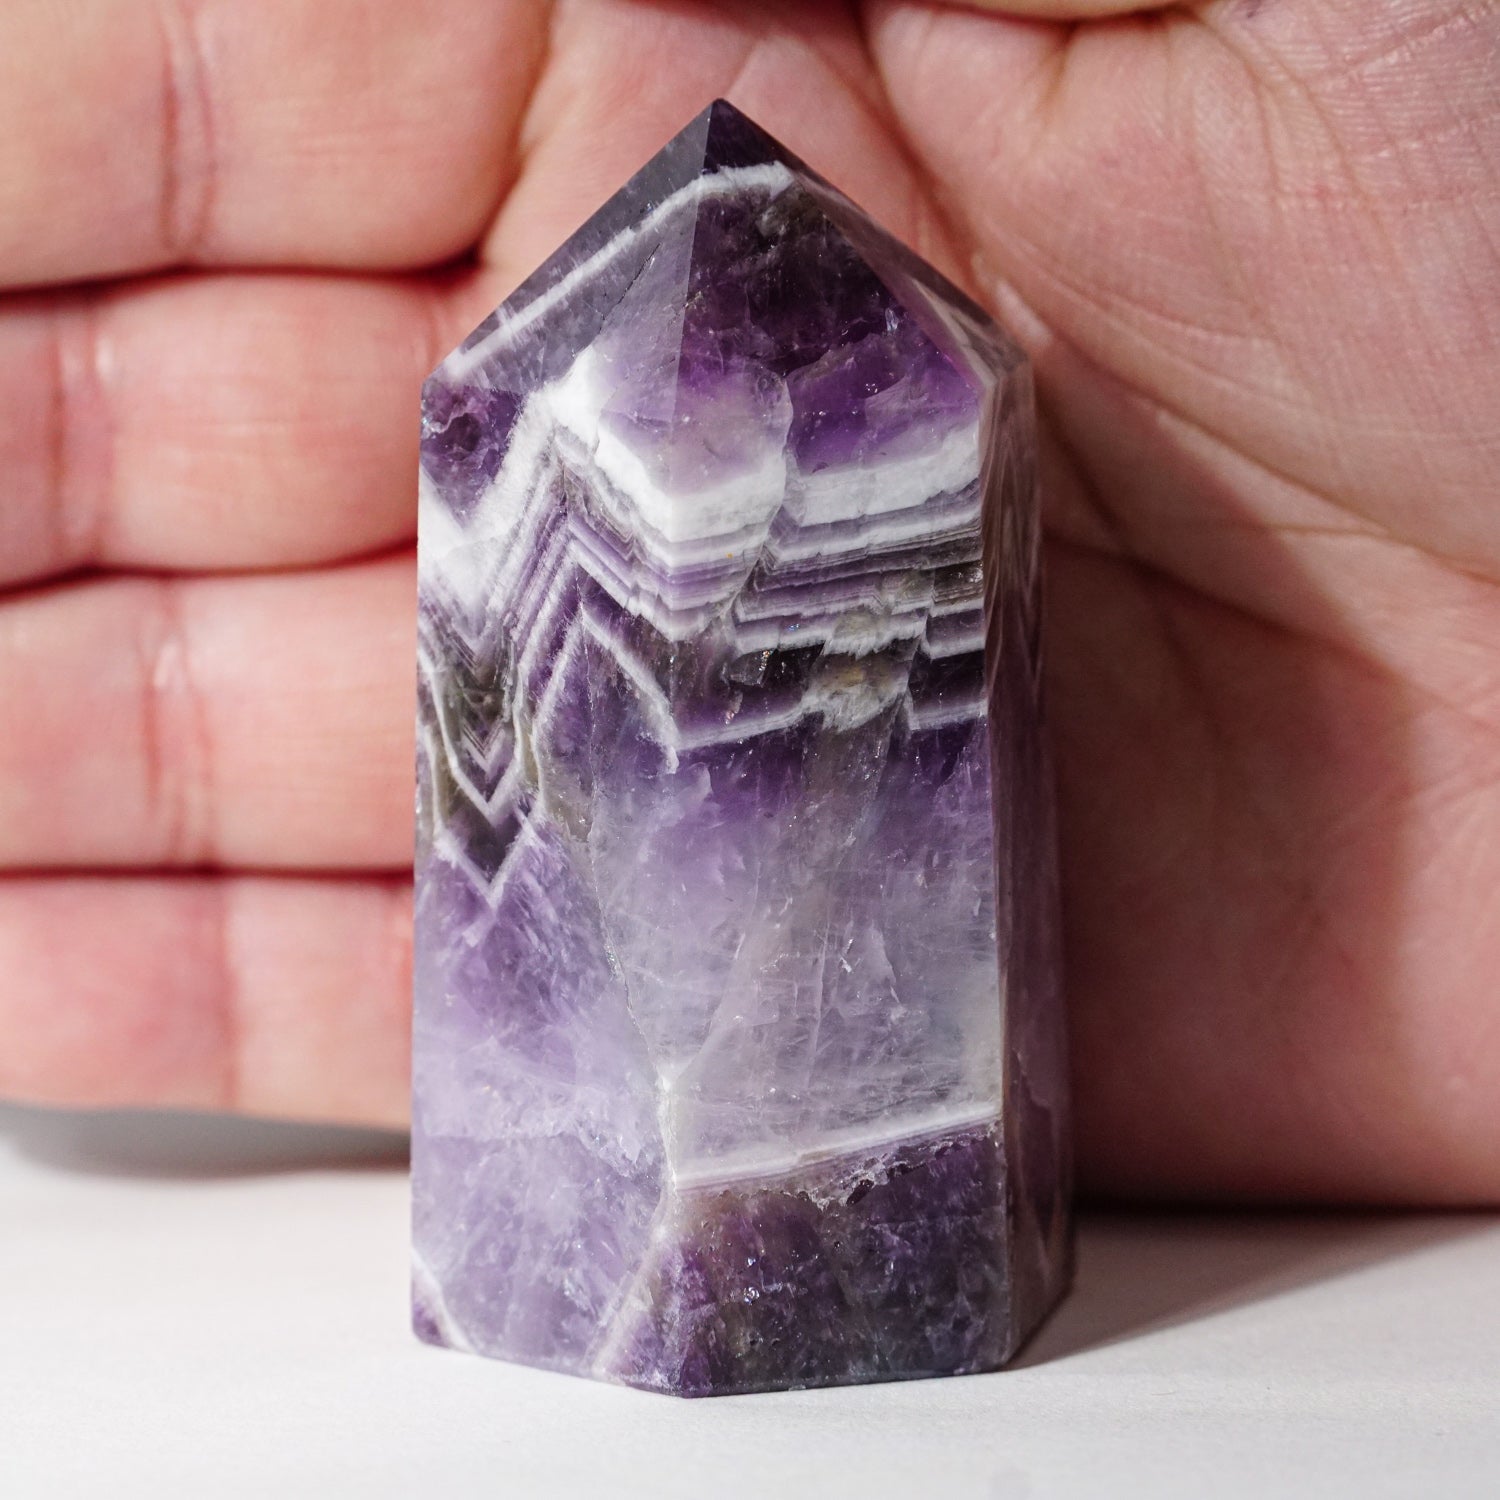 Polished Chevron Amethyst Point from Brazil (121 grams)